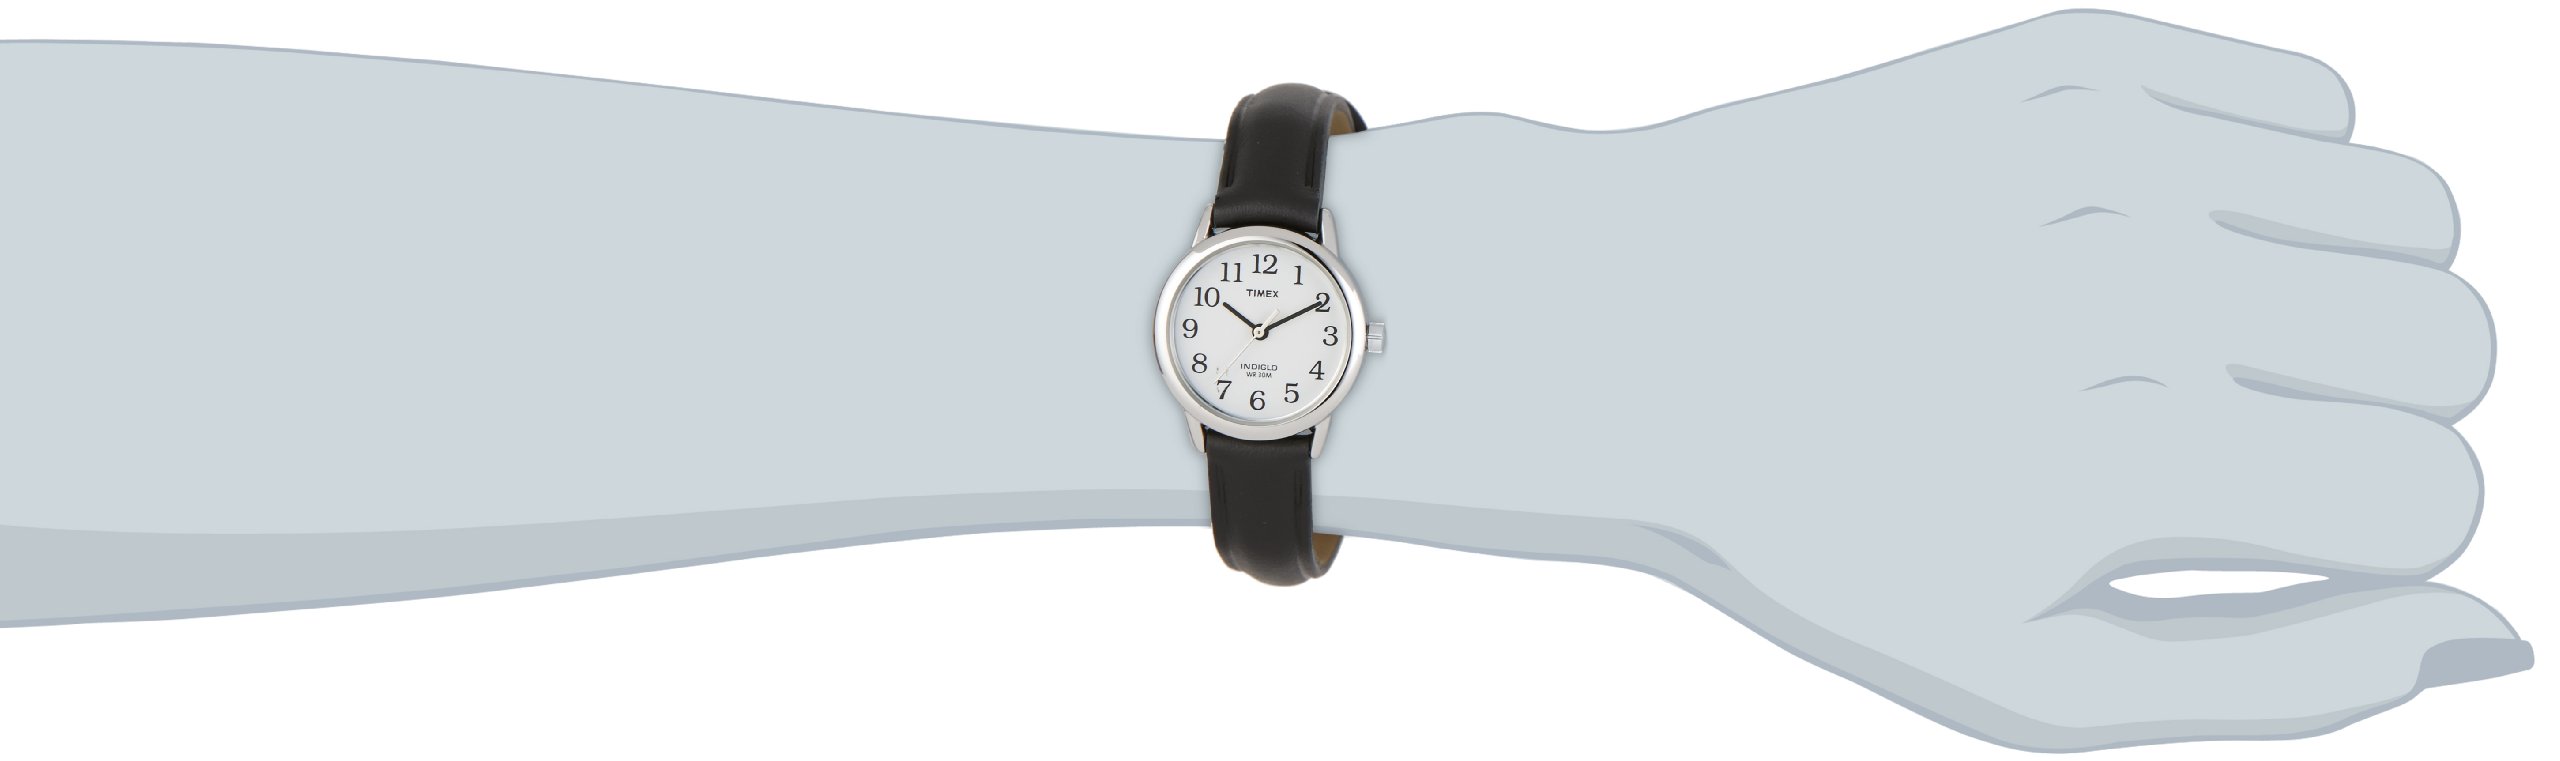 Timex Women's T20441 Easy Reader 25mm Black/Silver-Tone/White Leather Strap Watch